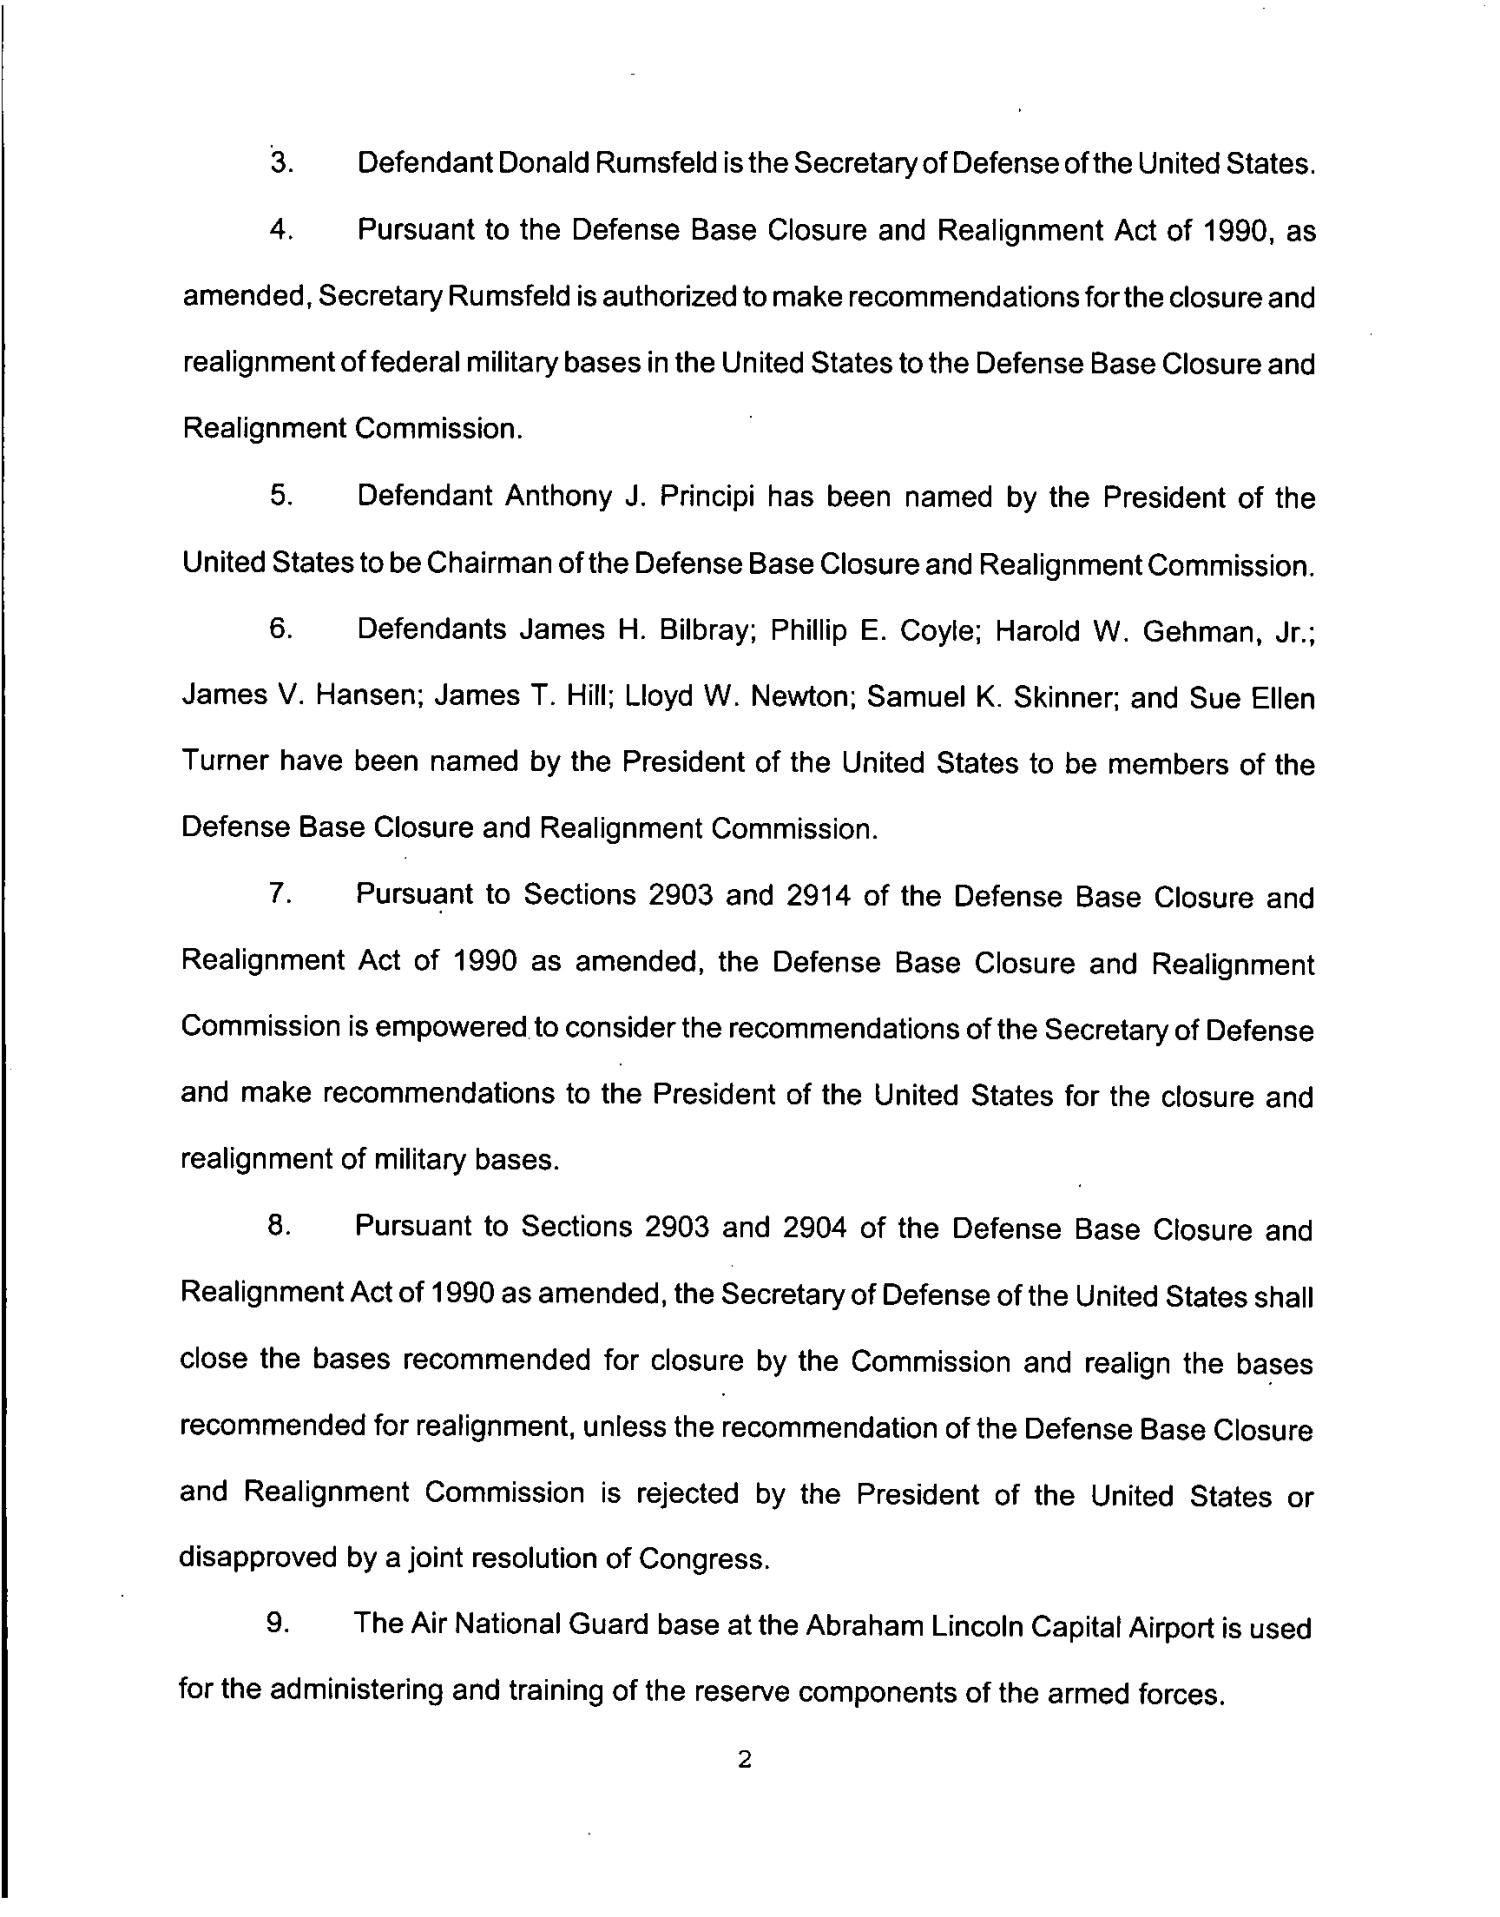 Complaint filed by Illinois Gov Blagojevich against SecDef Rumsfeld and BRAC Commissioners
                                                
                                                    [Sequence #]: 2 of 10
                                                